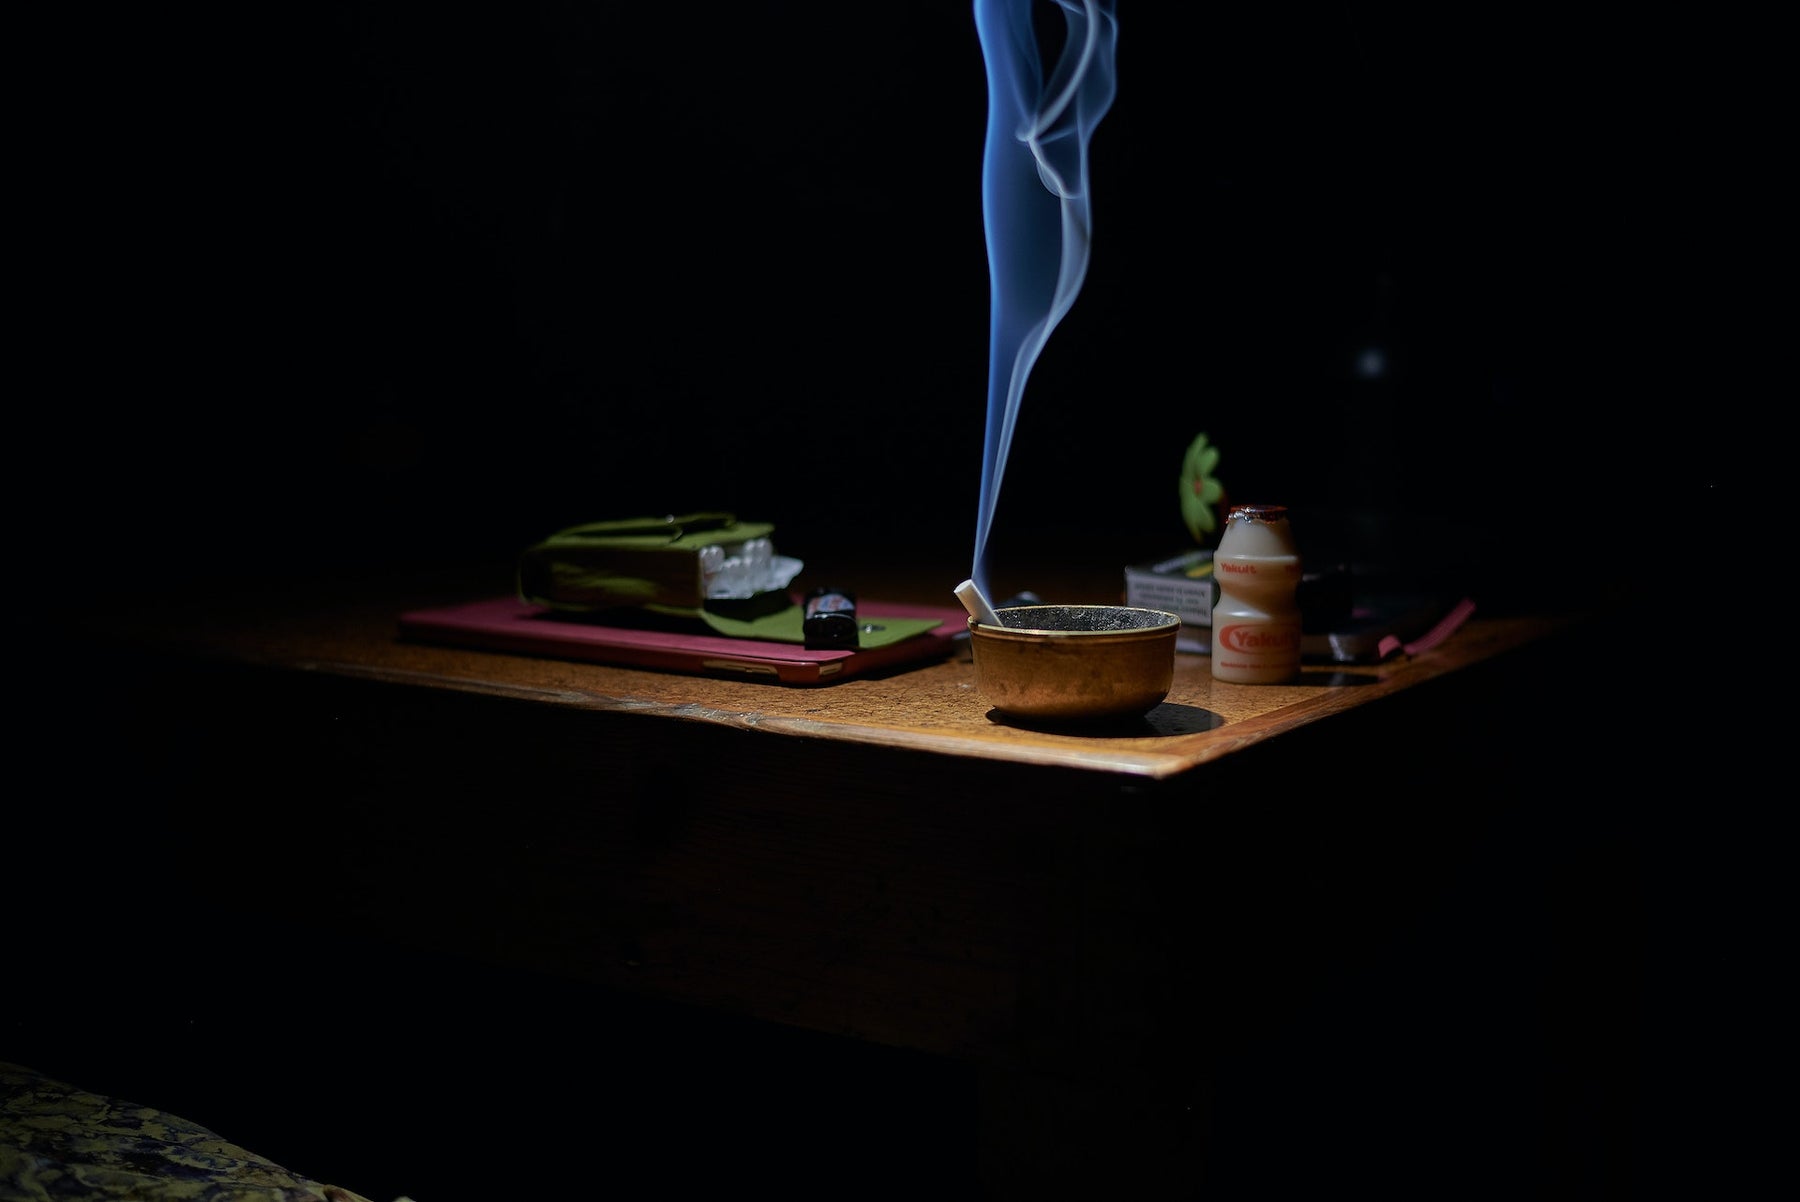 How to smoke weed in your room - A discreet smoking solution